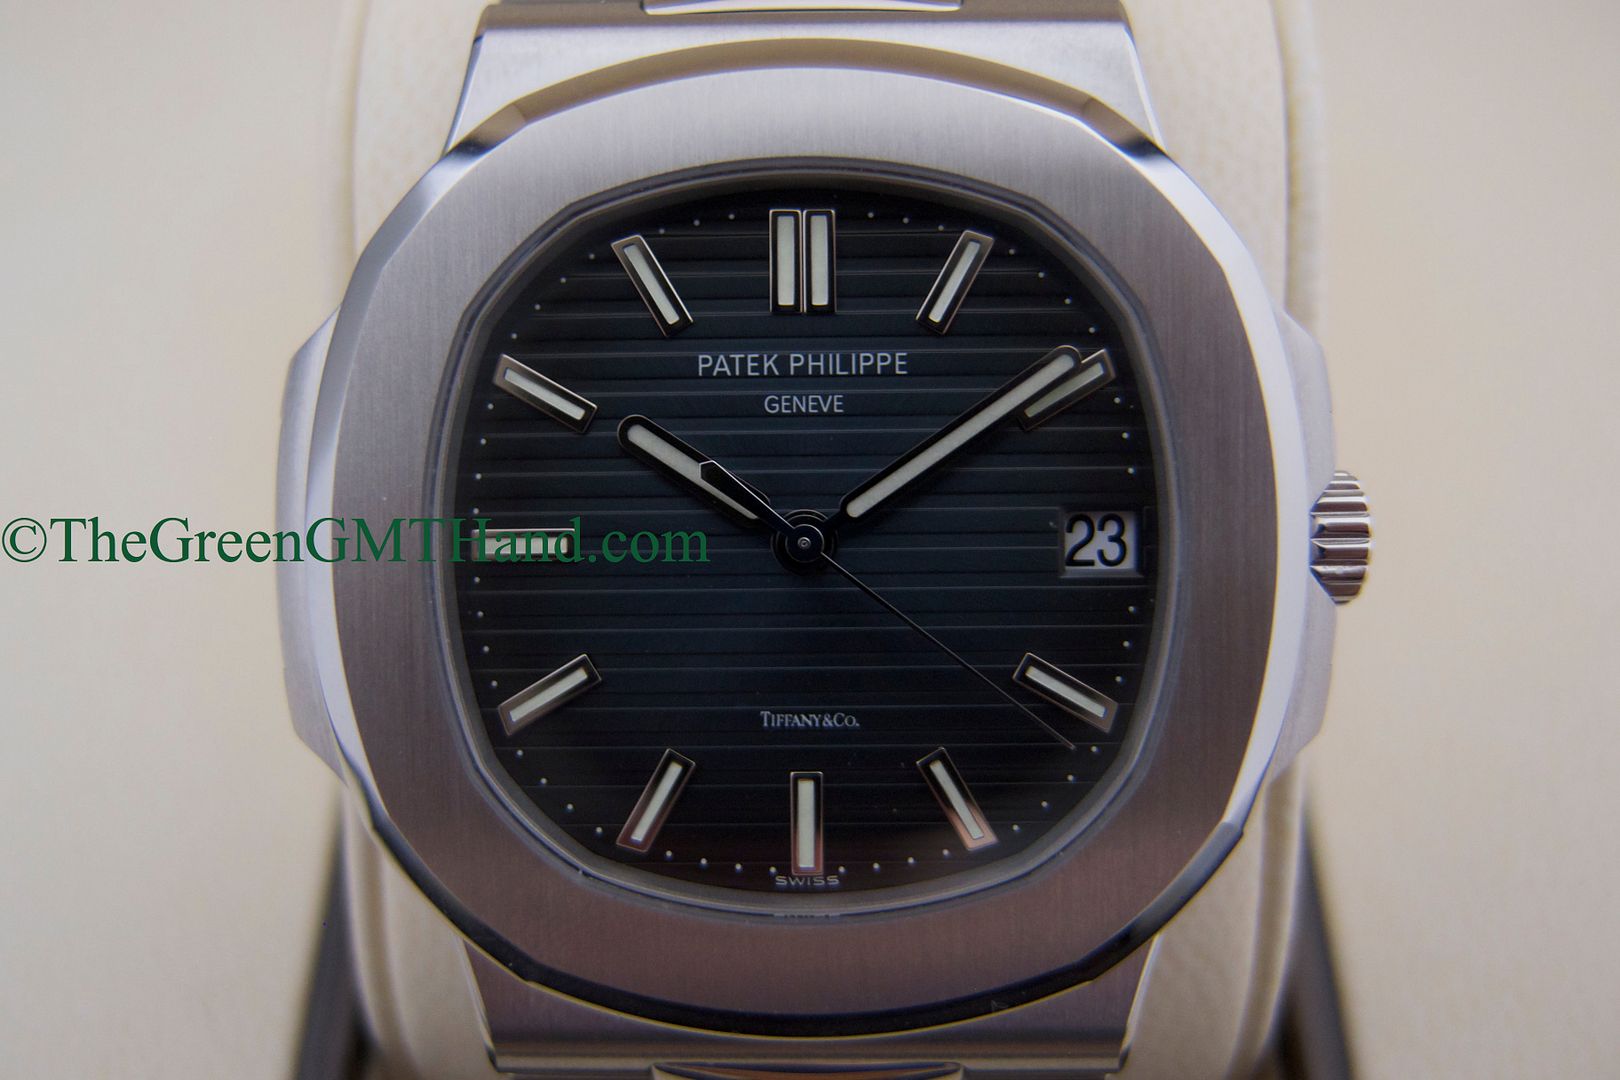  Patek Philippe For Sale-Tiffany Dial Patek Philippe 5711/1A-010 Steel Nautilus Blue Dial 324 SC Movement Patek Philippe Seal 5.8 Million Serial Preowned-Patek Philippe Watches For Sale Online